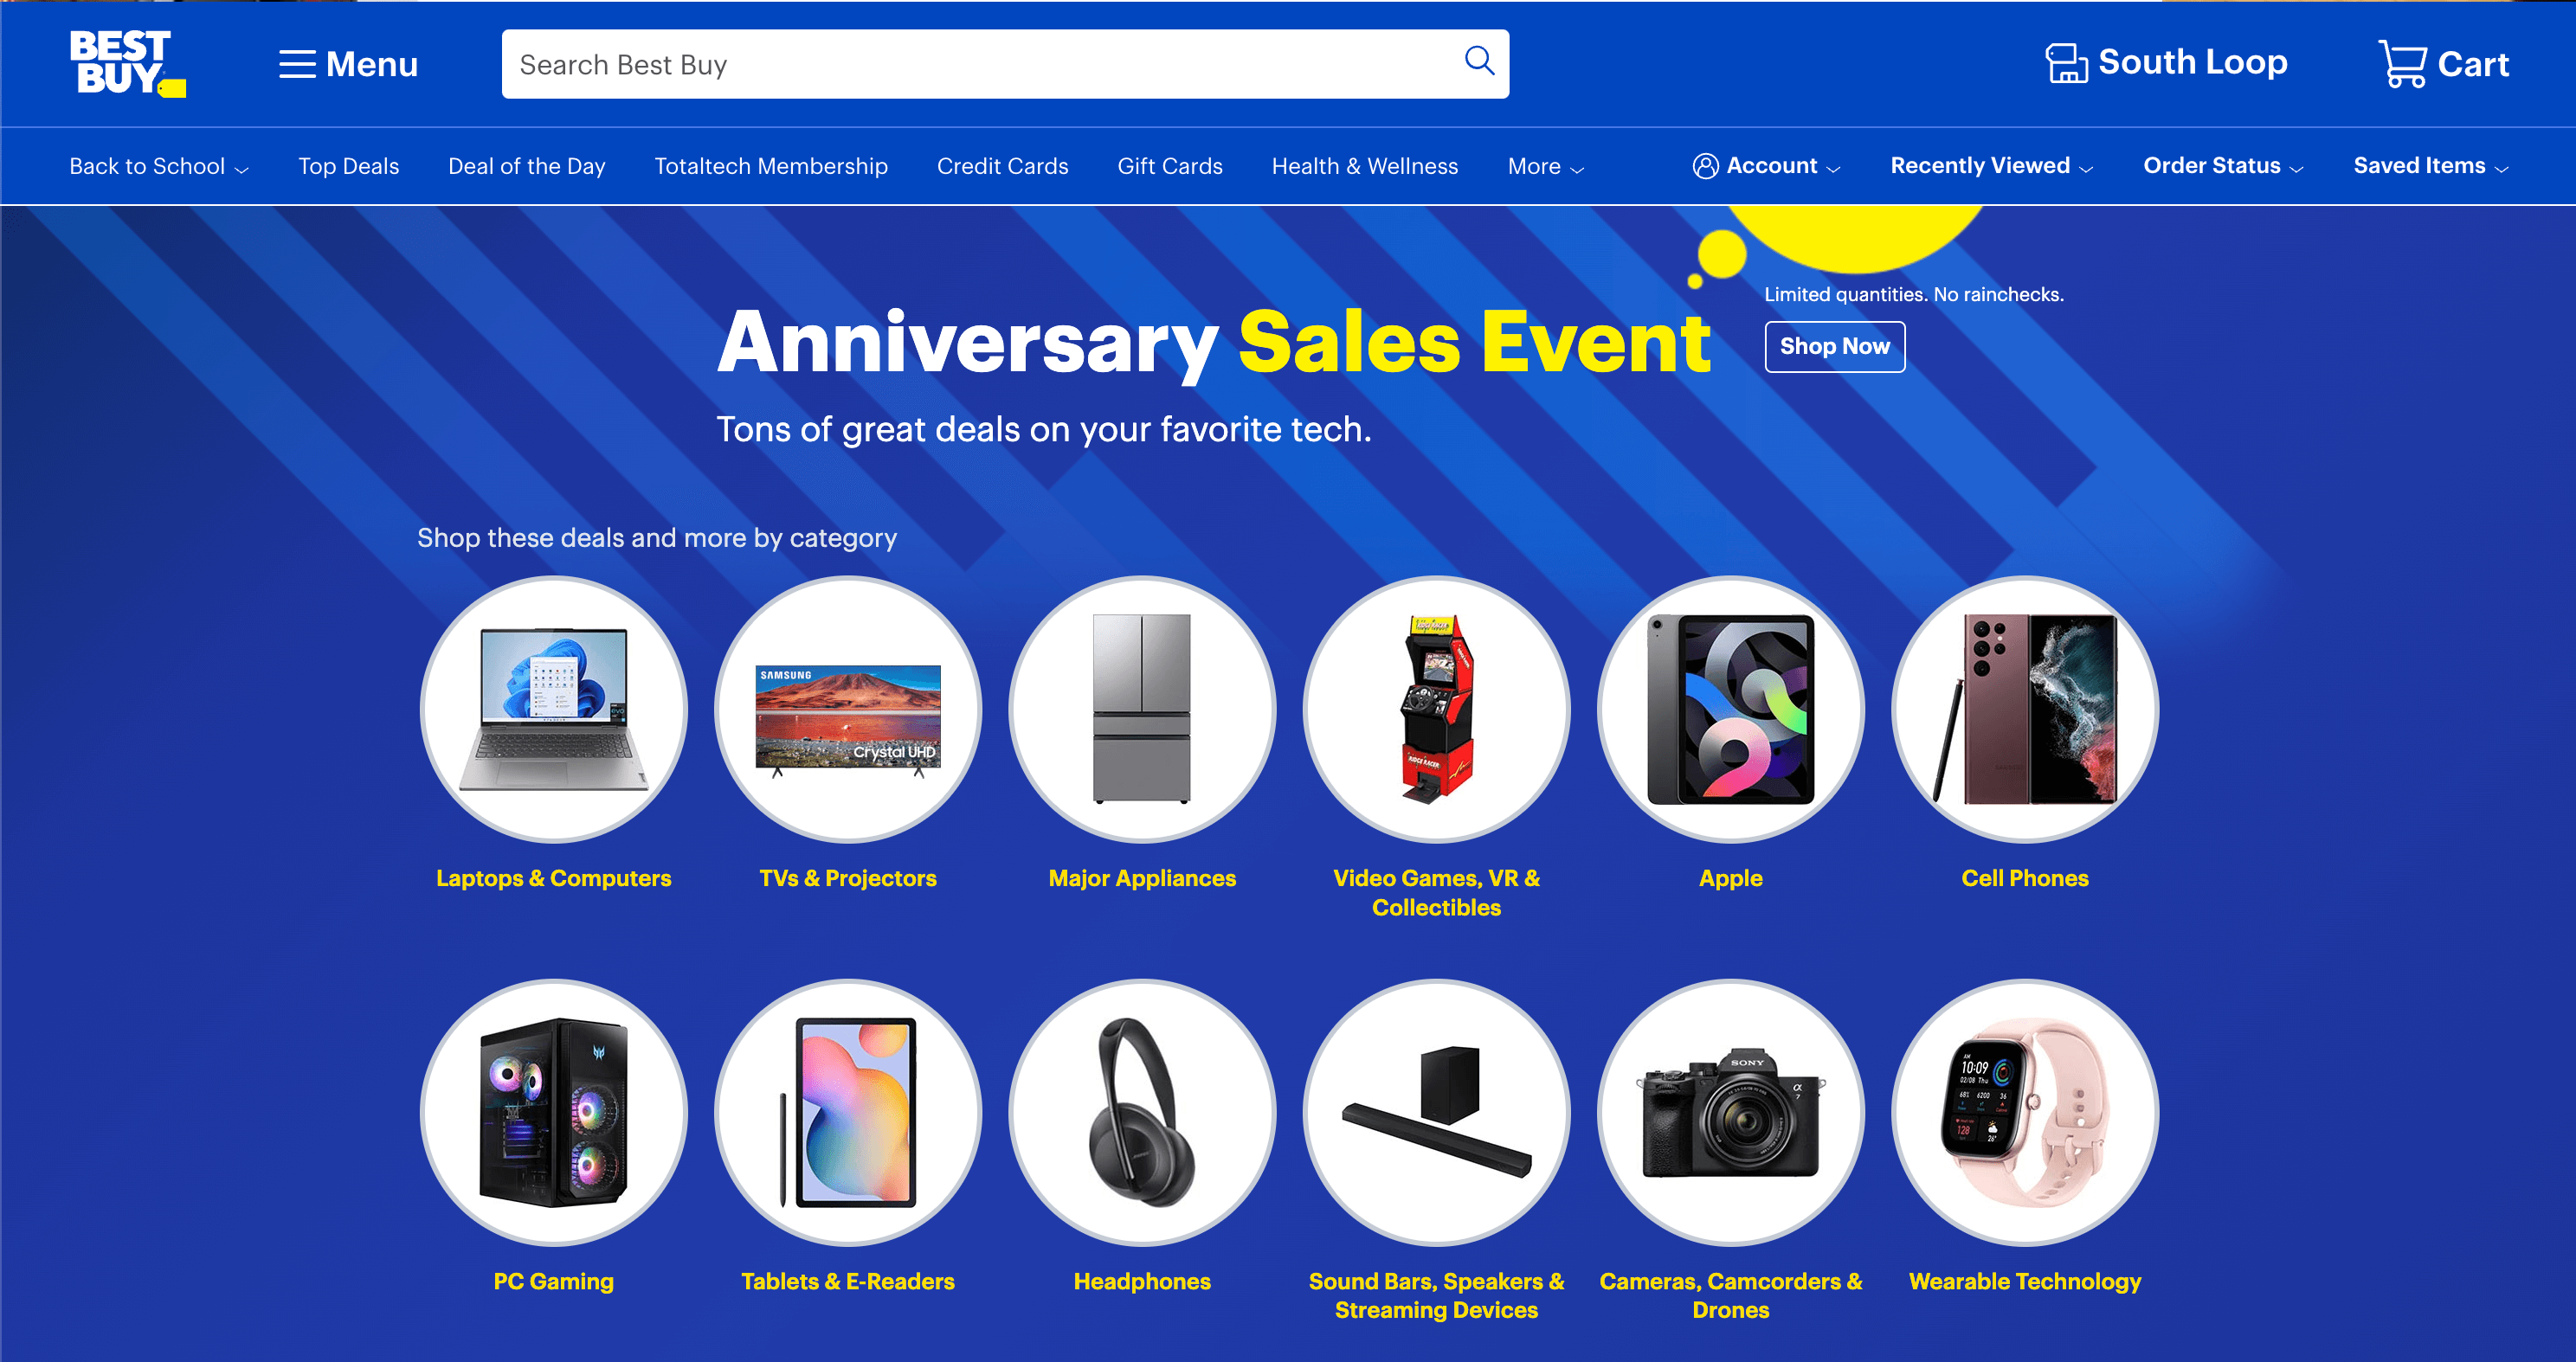 Best Buy's home page